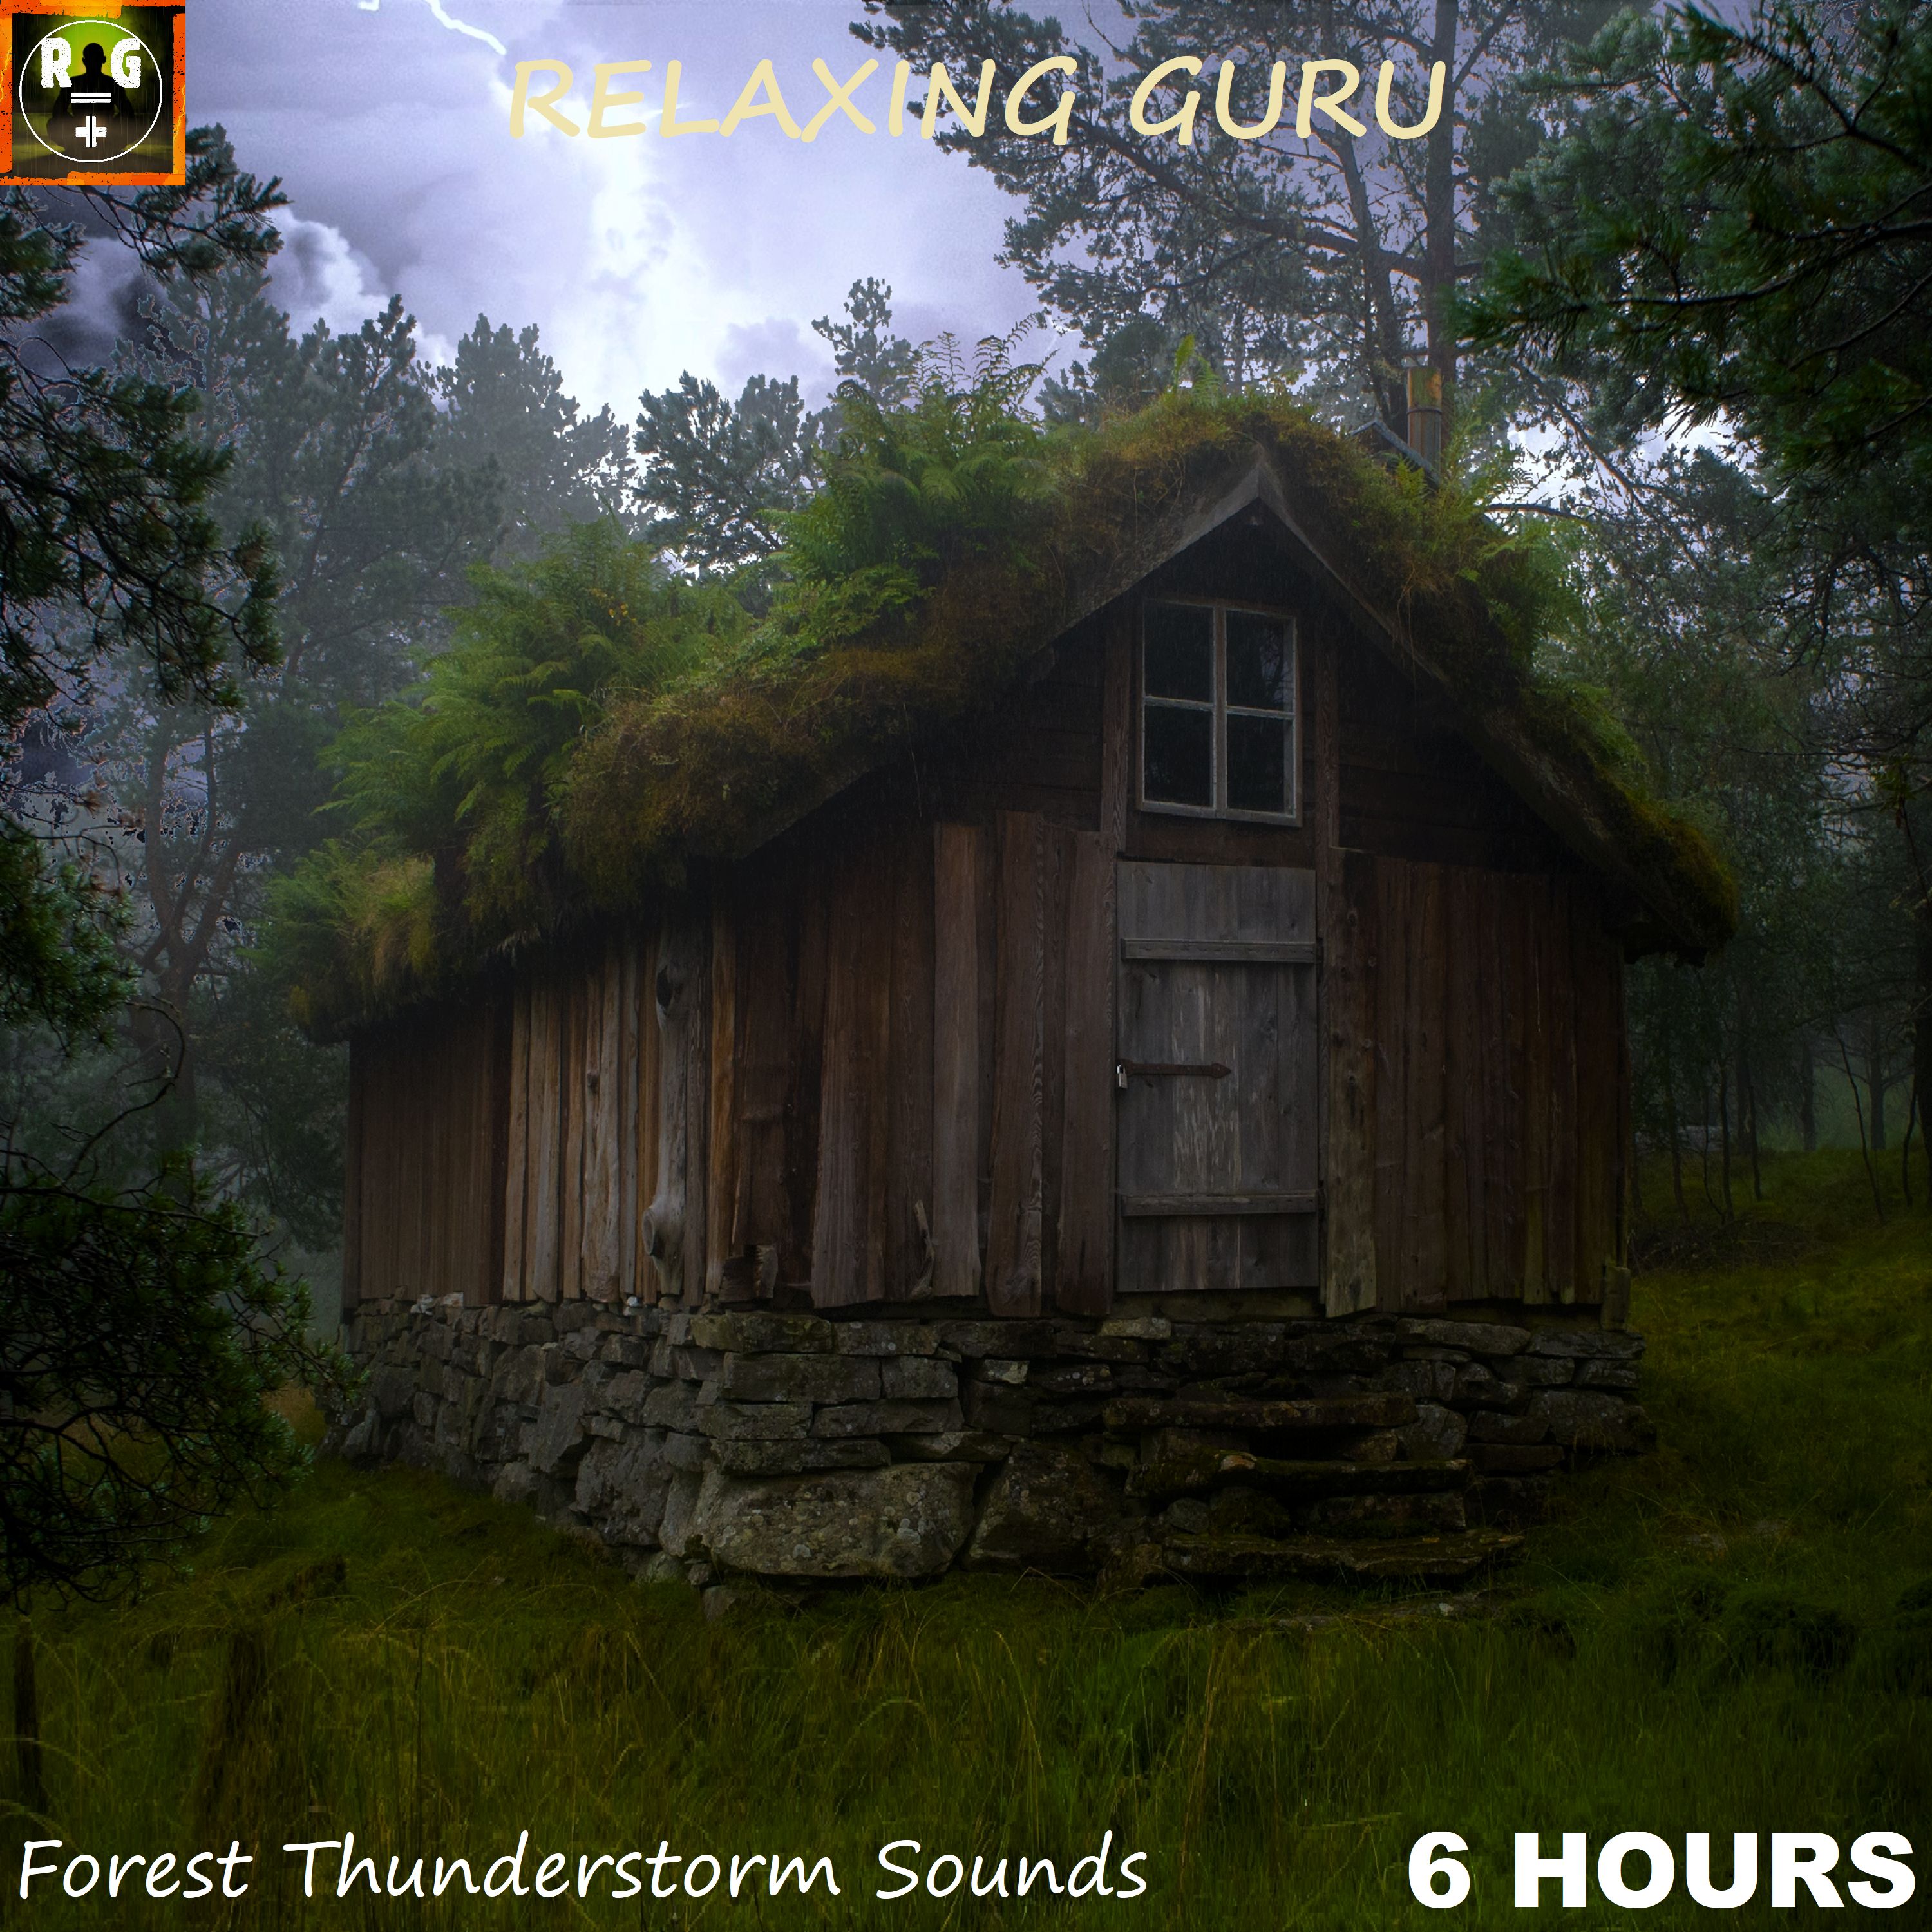 Aflaai Relaxing Rain & Thunder on a Wooden Hut deep in the Forest - Thunderstorm Sounds for Sleep (6 HOURS)